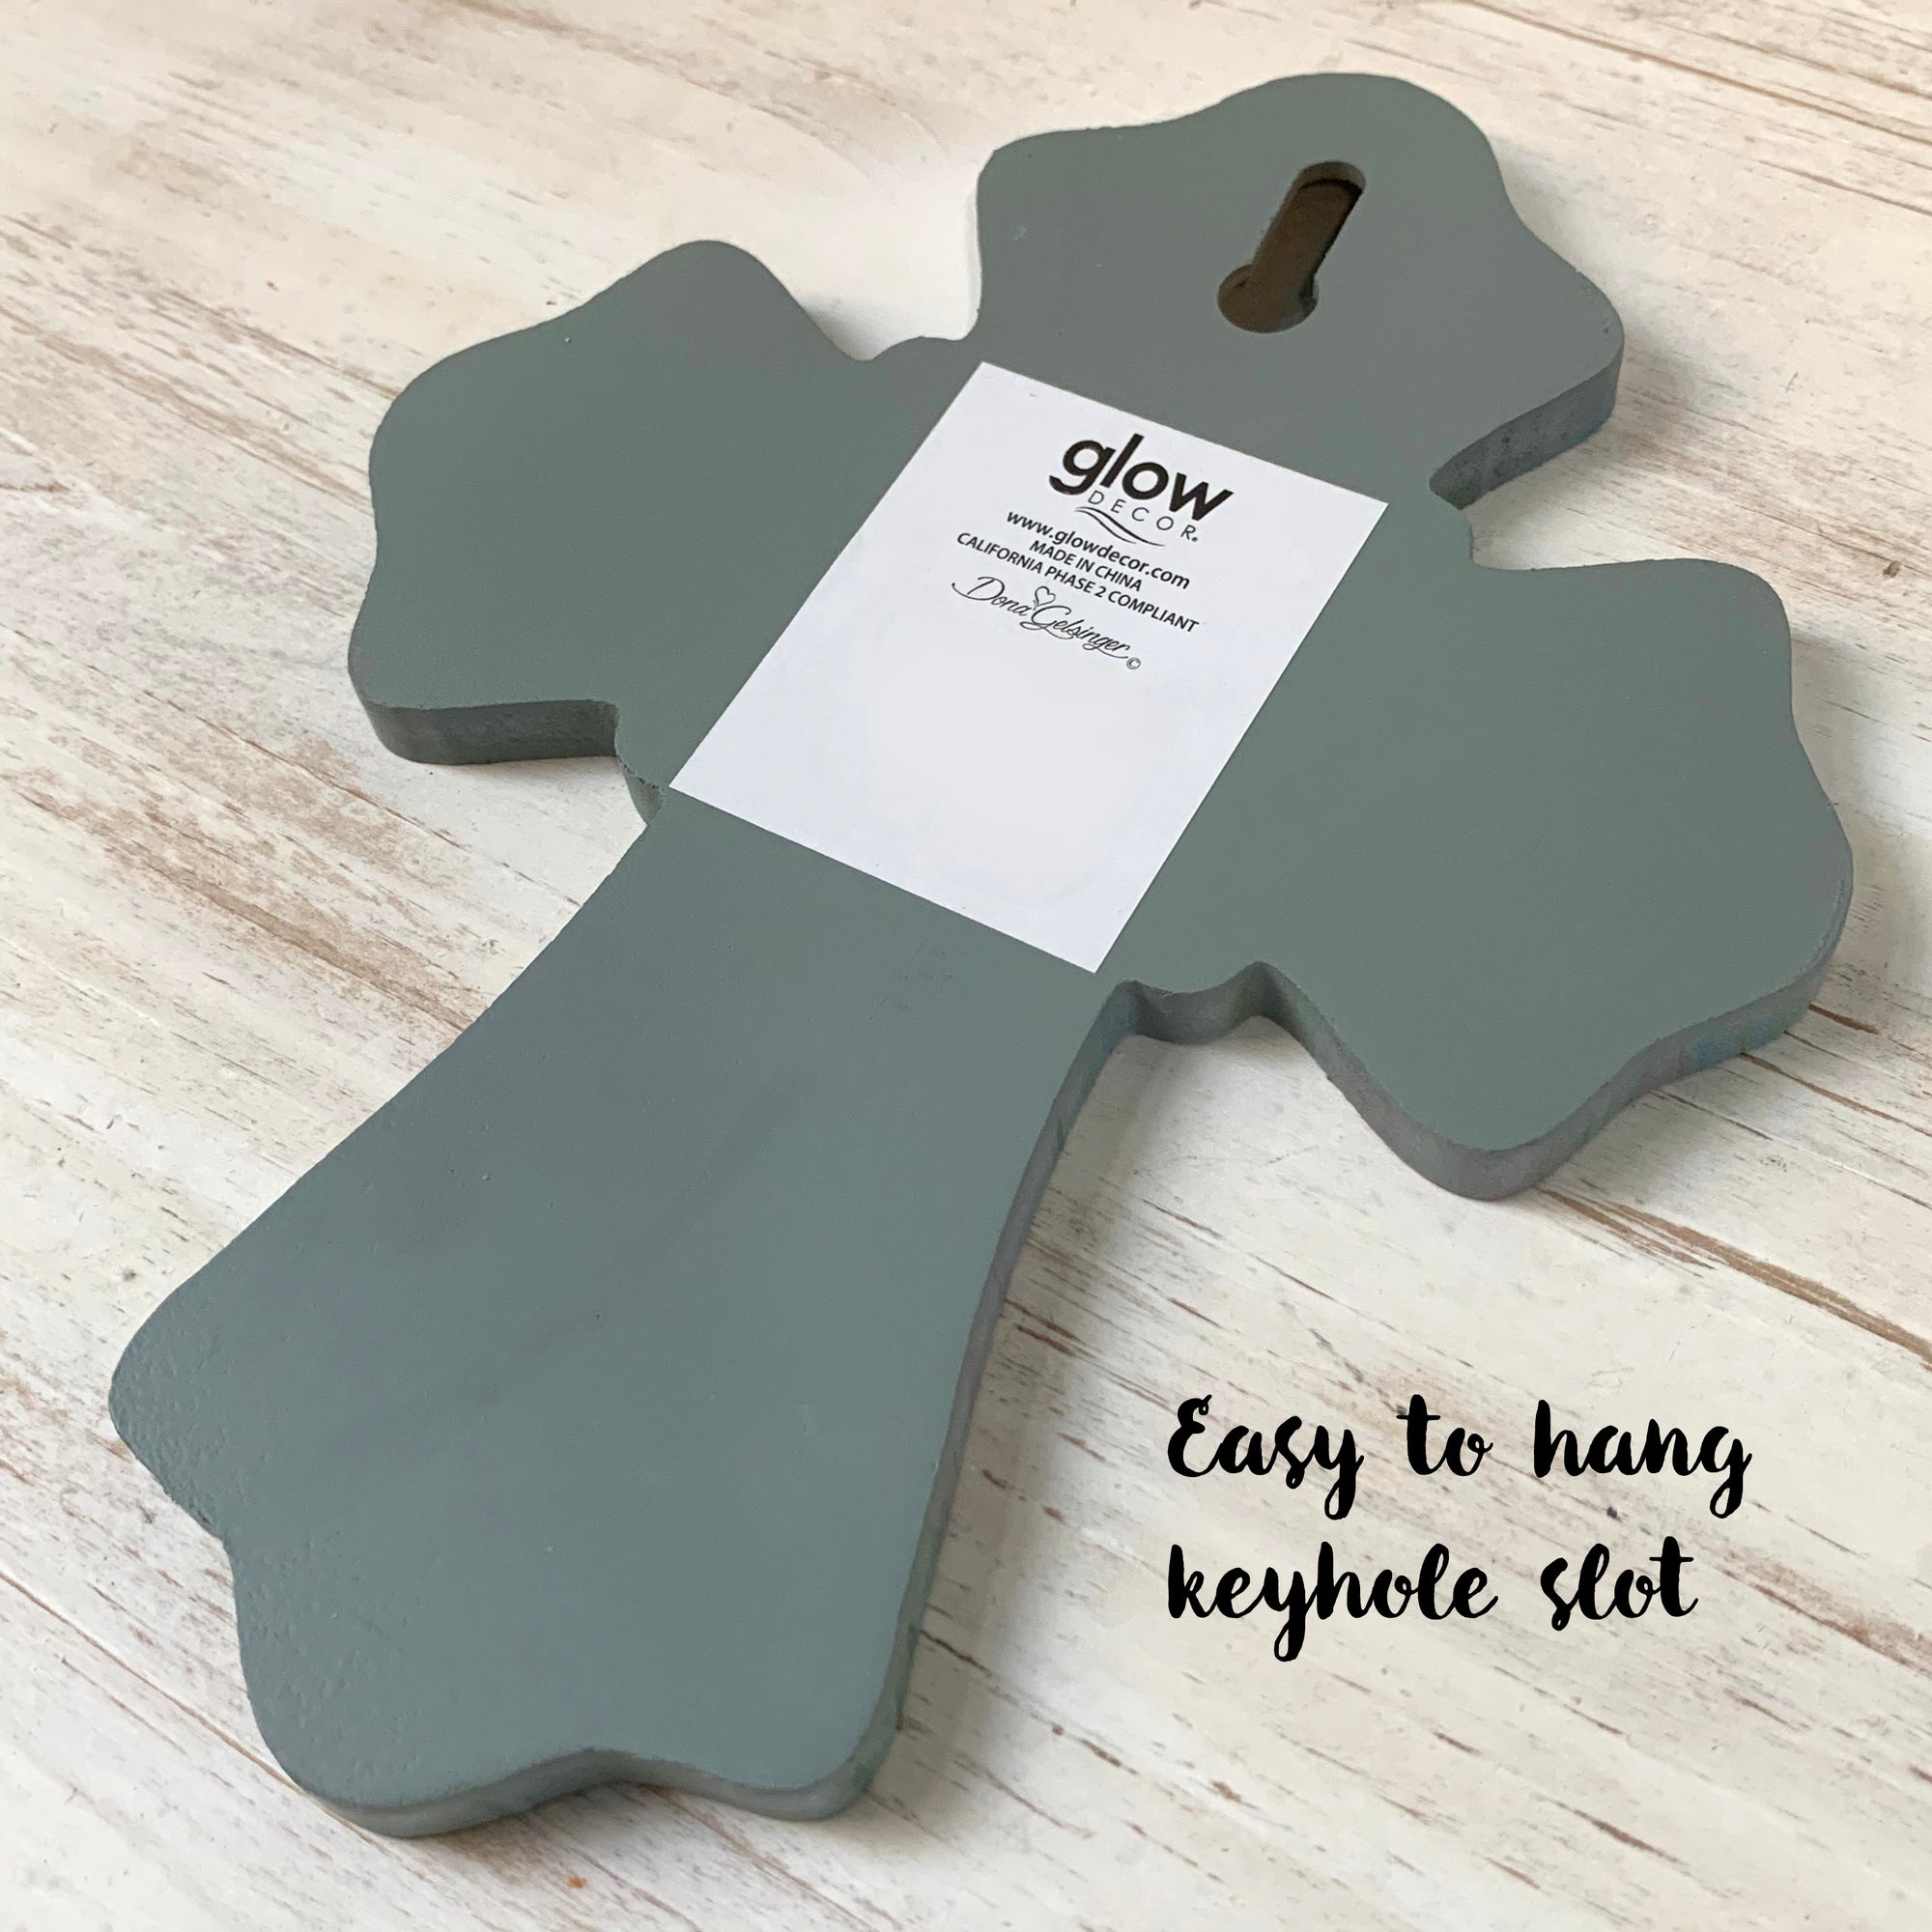 Cats Are Blessings Wooden Cross